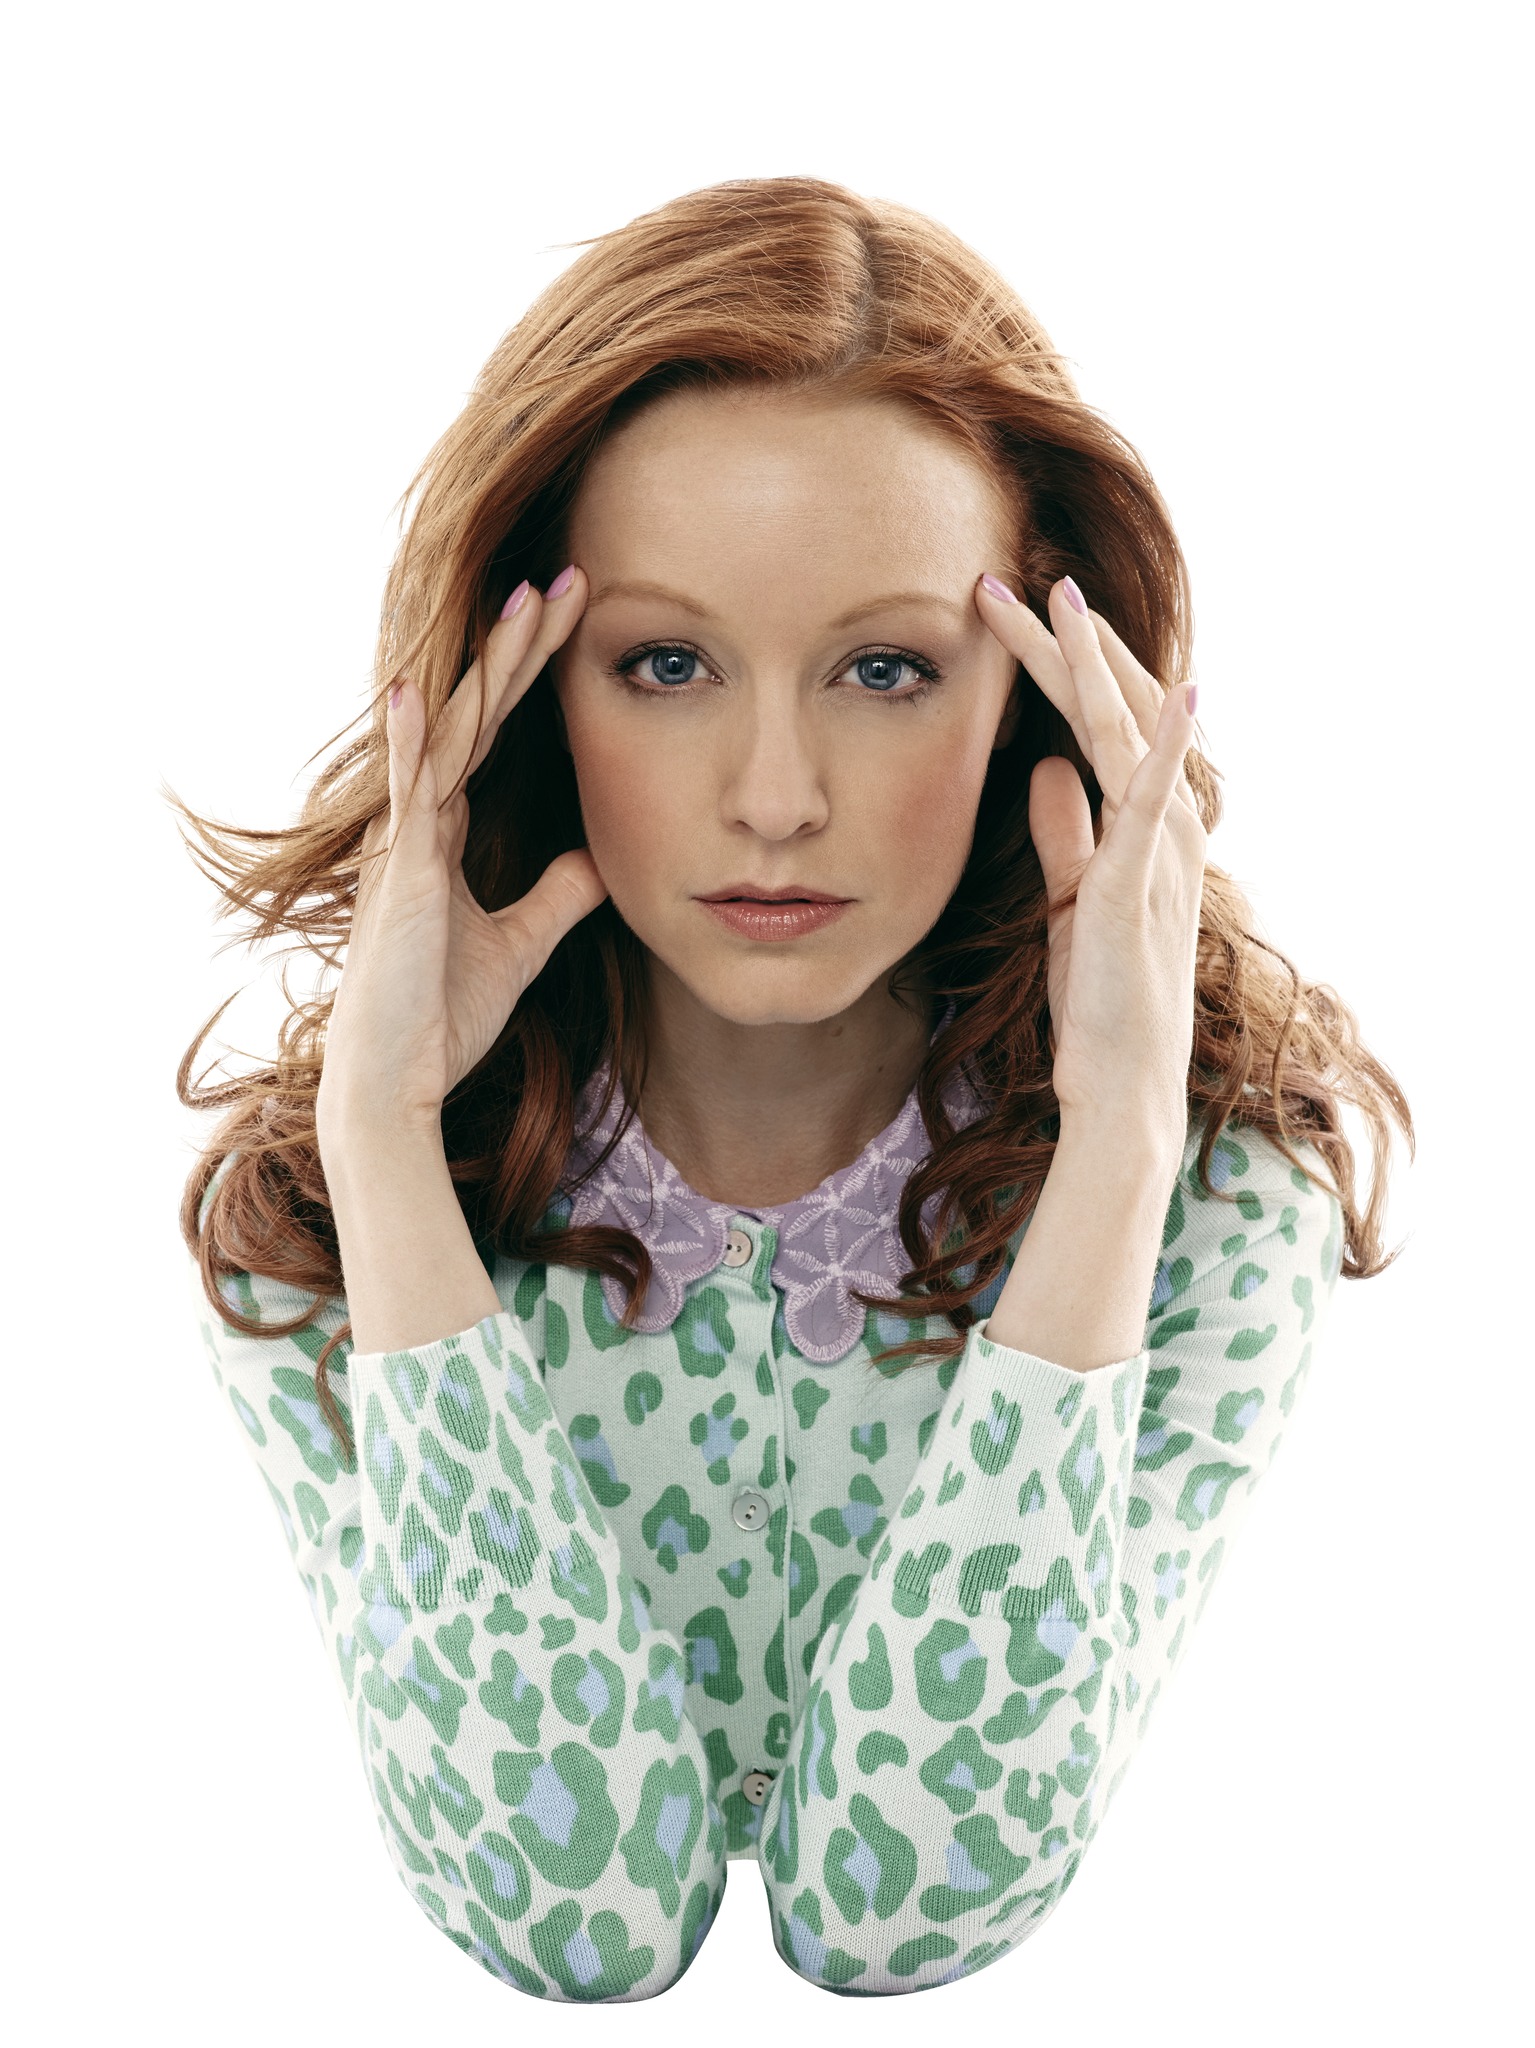 Lindy Booth photo #540491